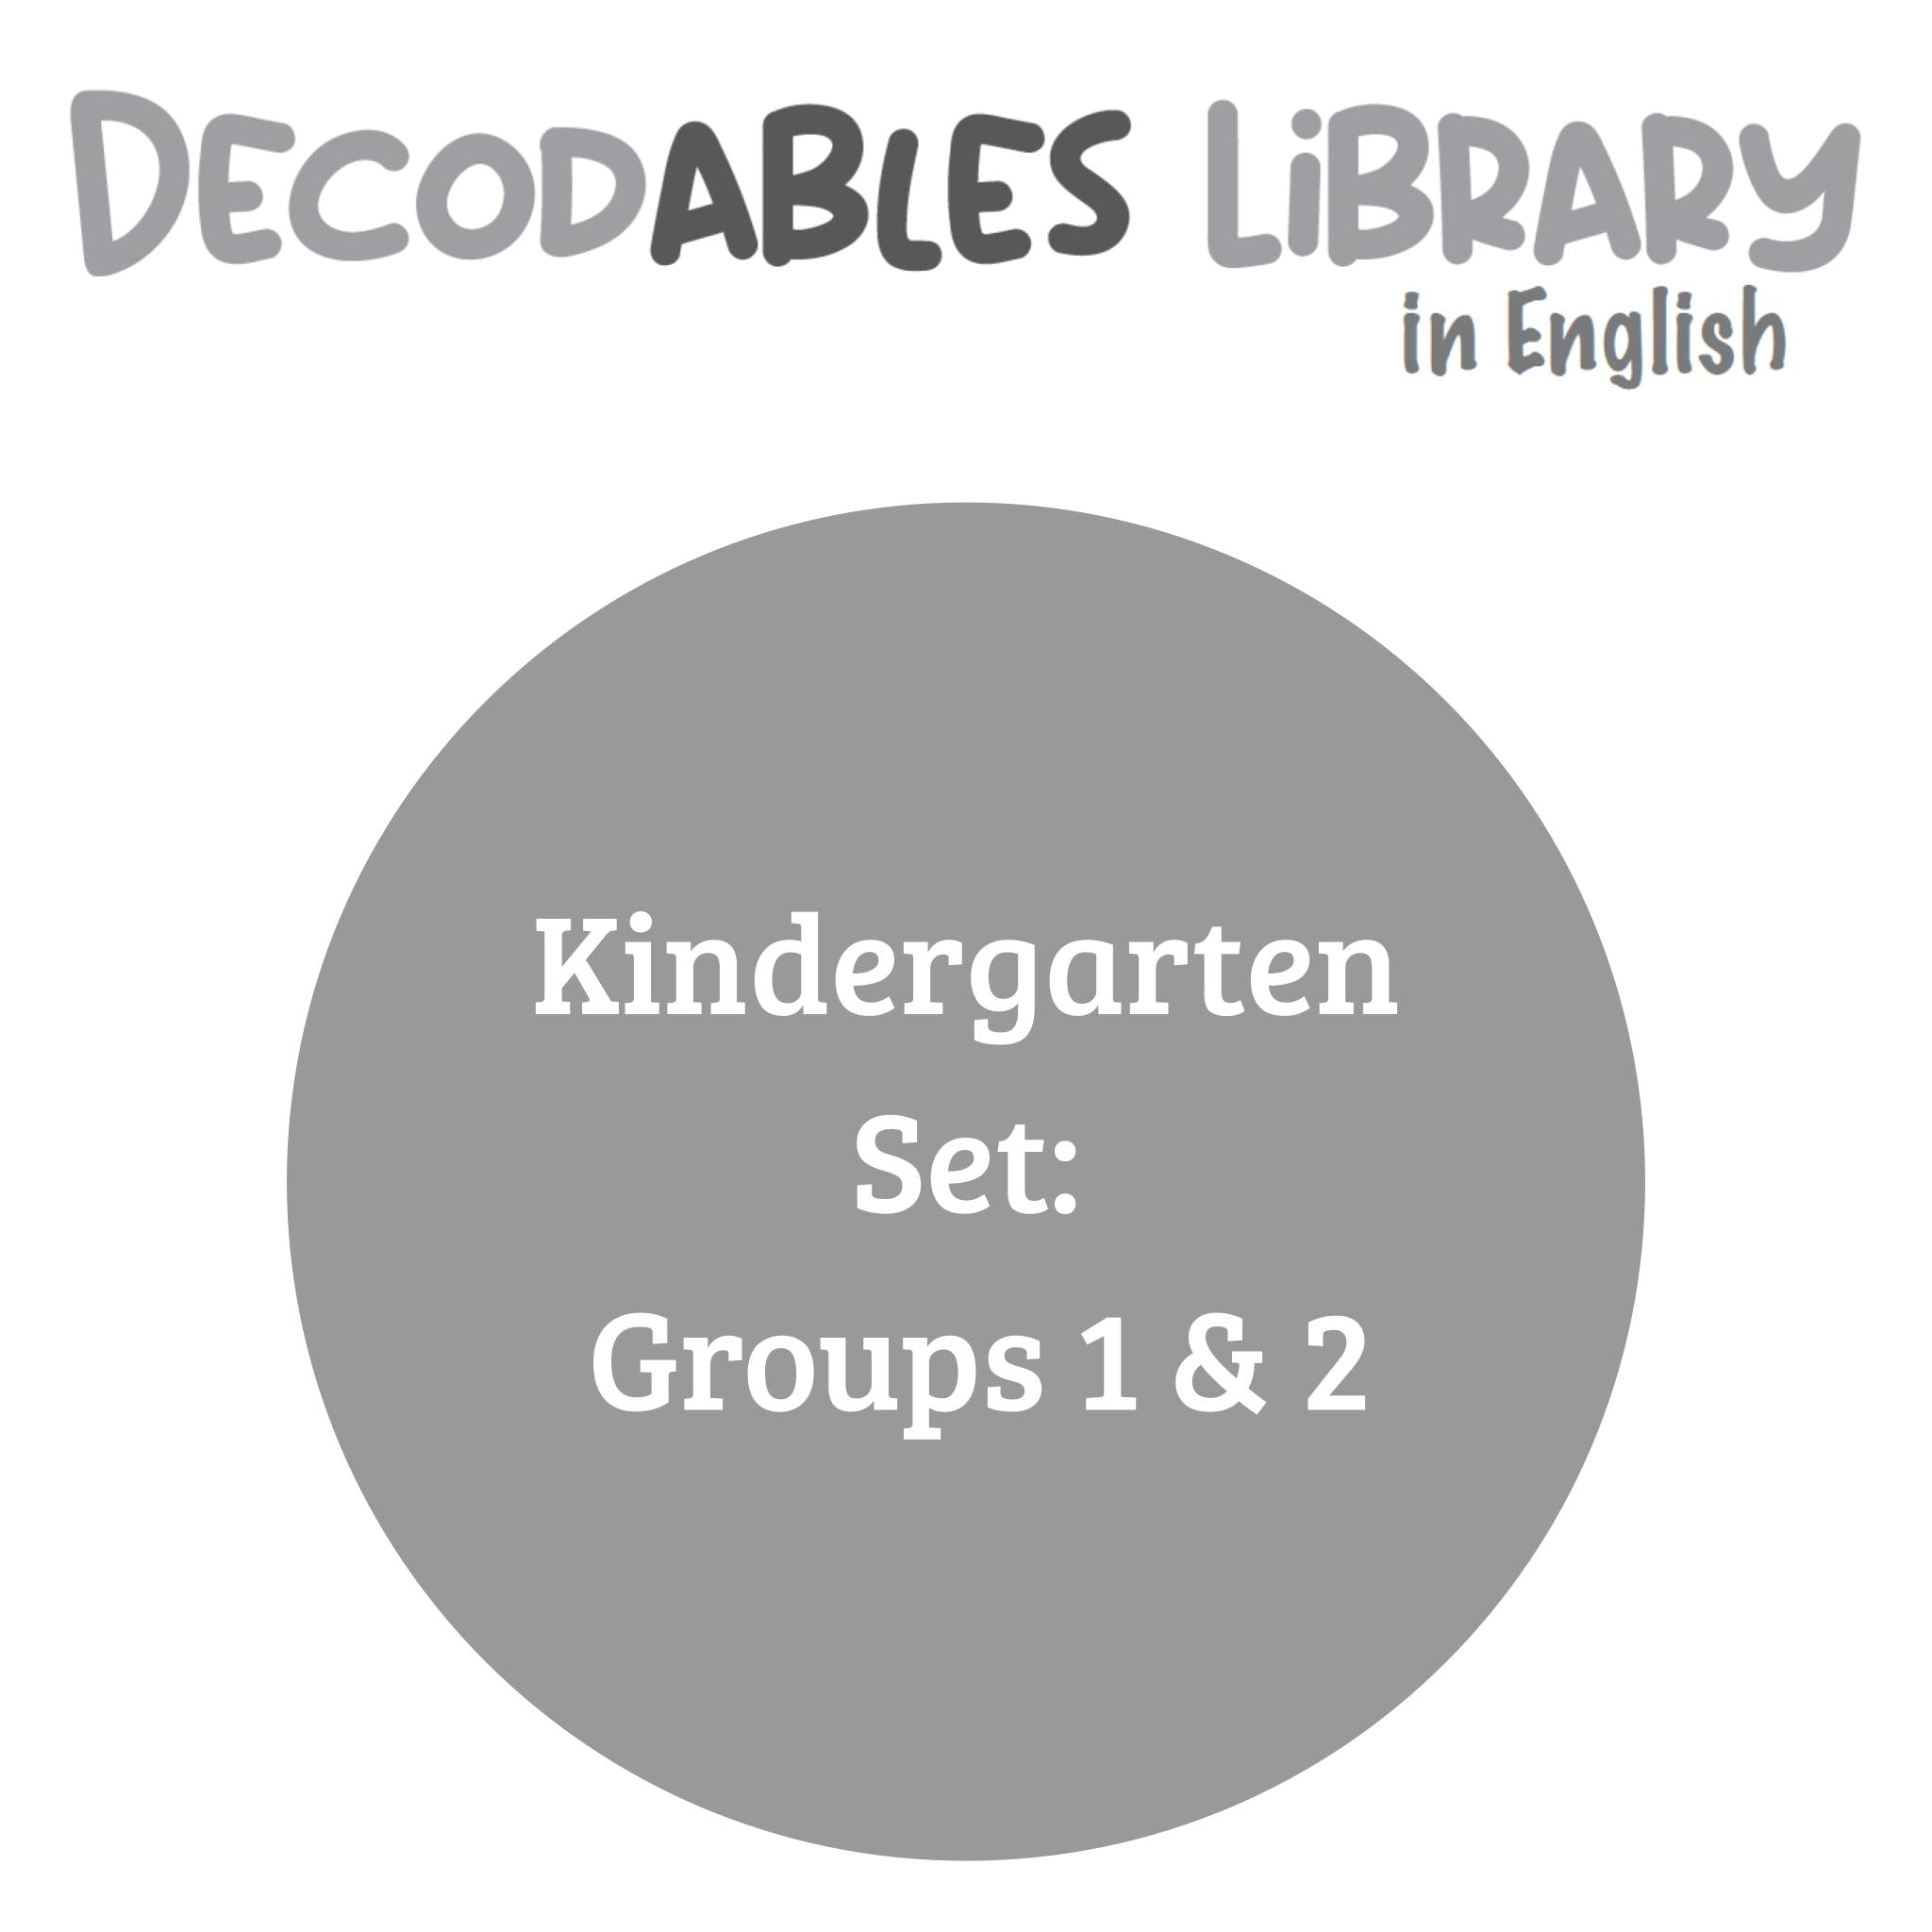 English Decodables Library - Kindergarten Set (Includes Groups 1 & 2)